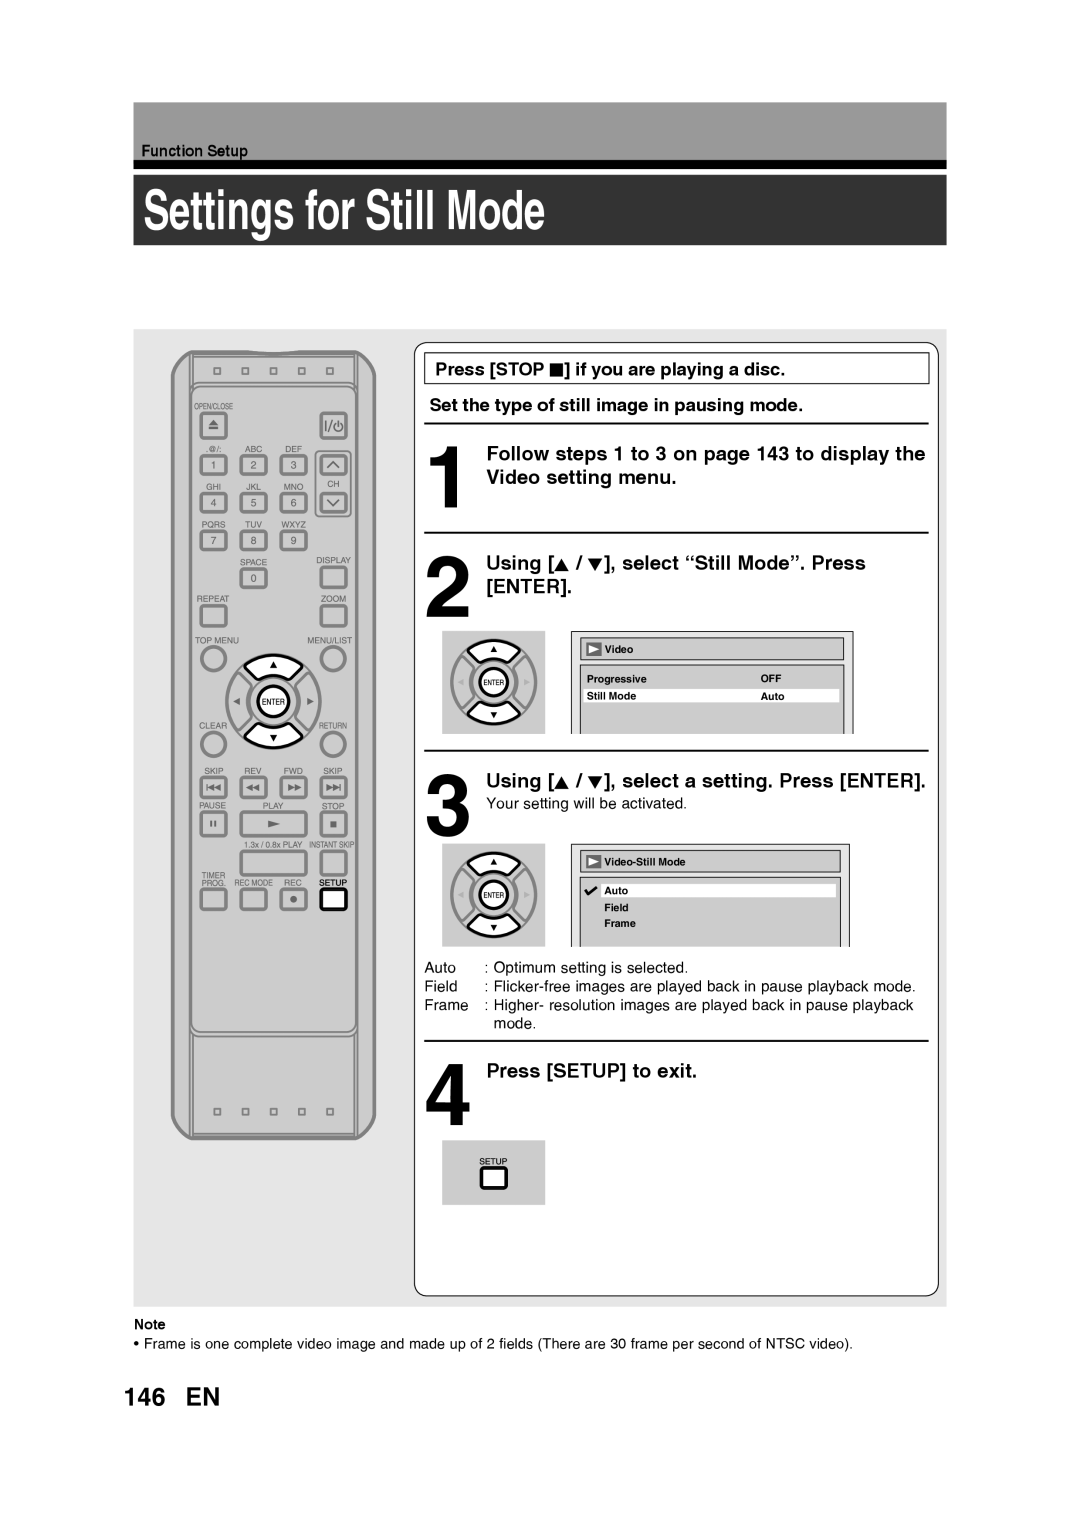 Toshiba D-RW2SU/D-RW2SC Settings for Still Mode, 146 EN, Follow steps 1 to 3 on page 143 to display the Video setting menu 